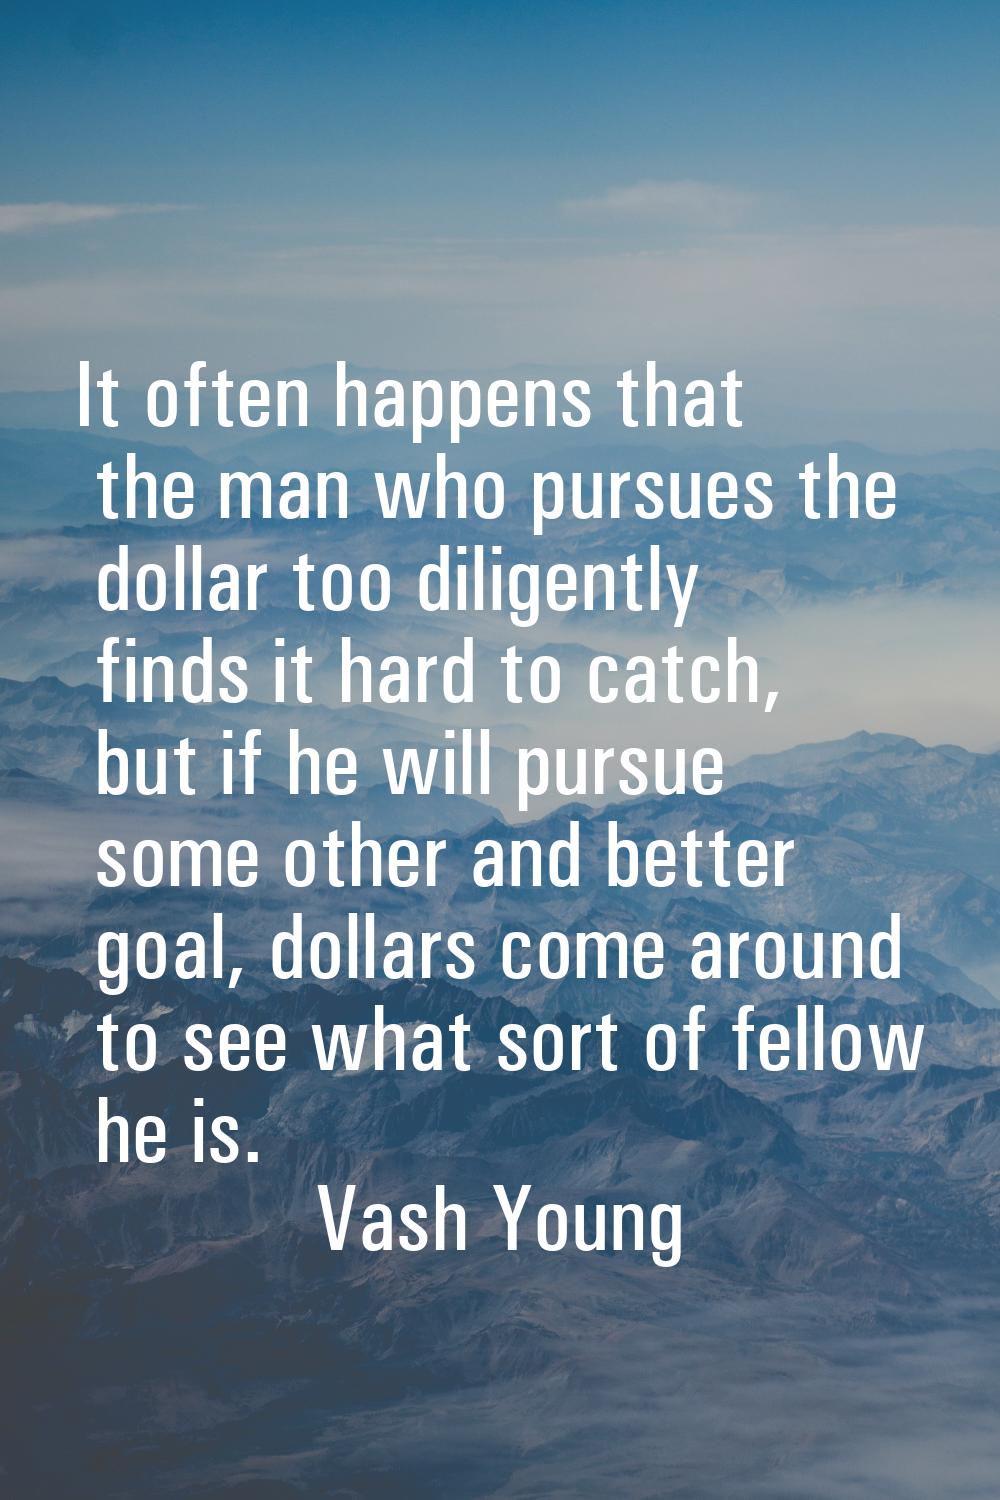 It often happens that the man who pursues the dollar too diligently finds it hard to catch, but if 